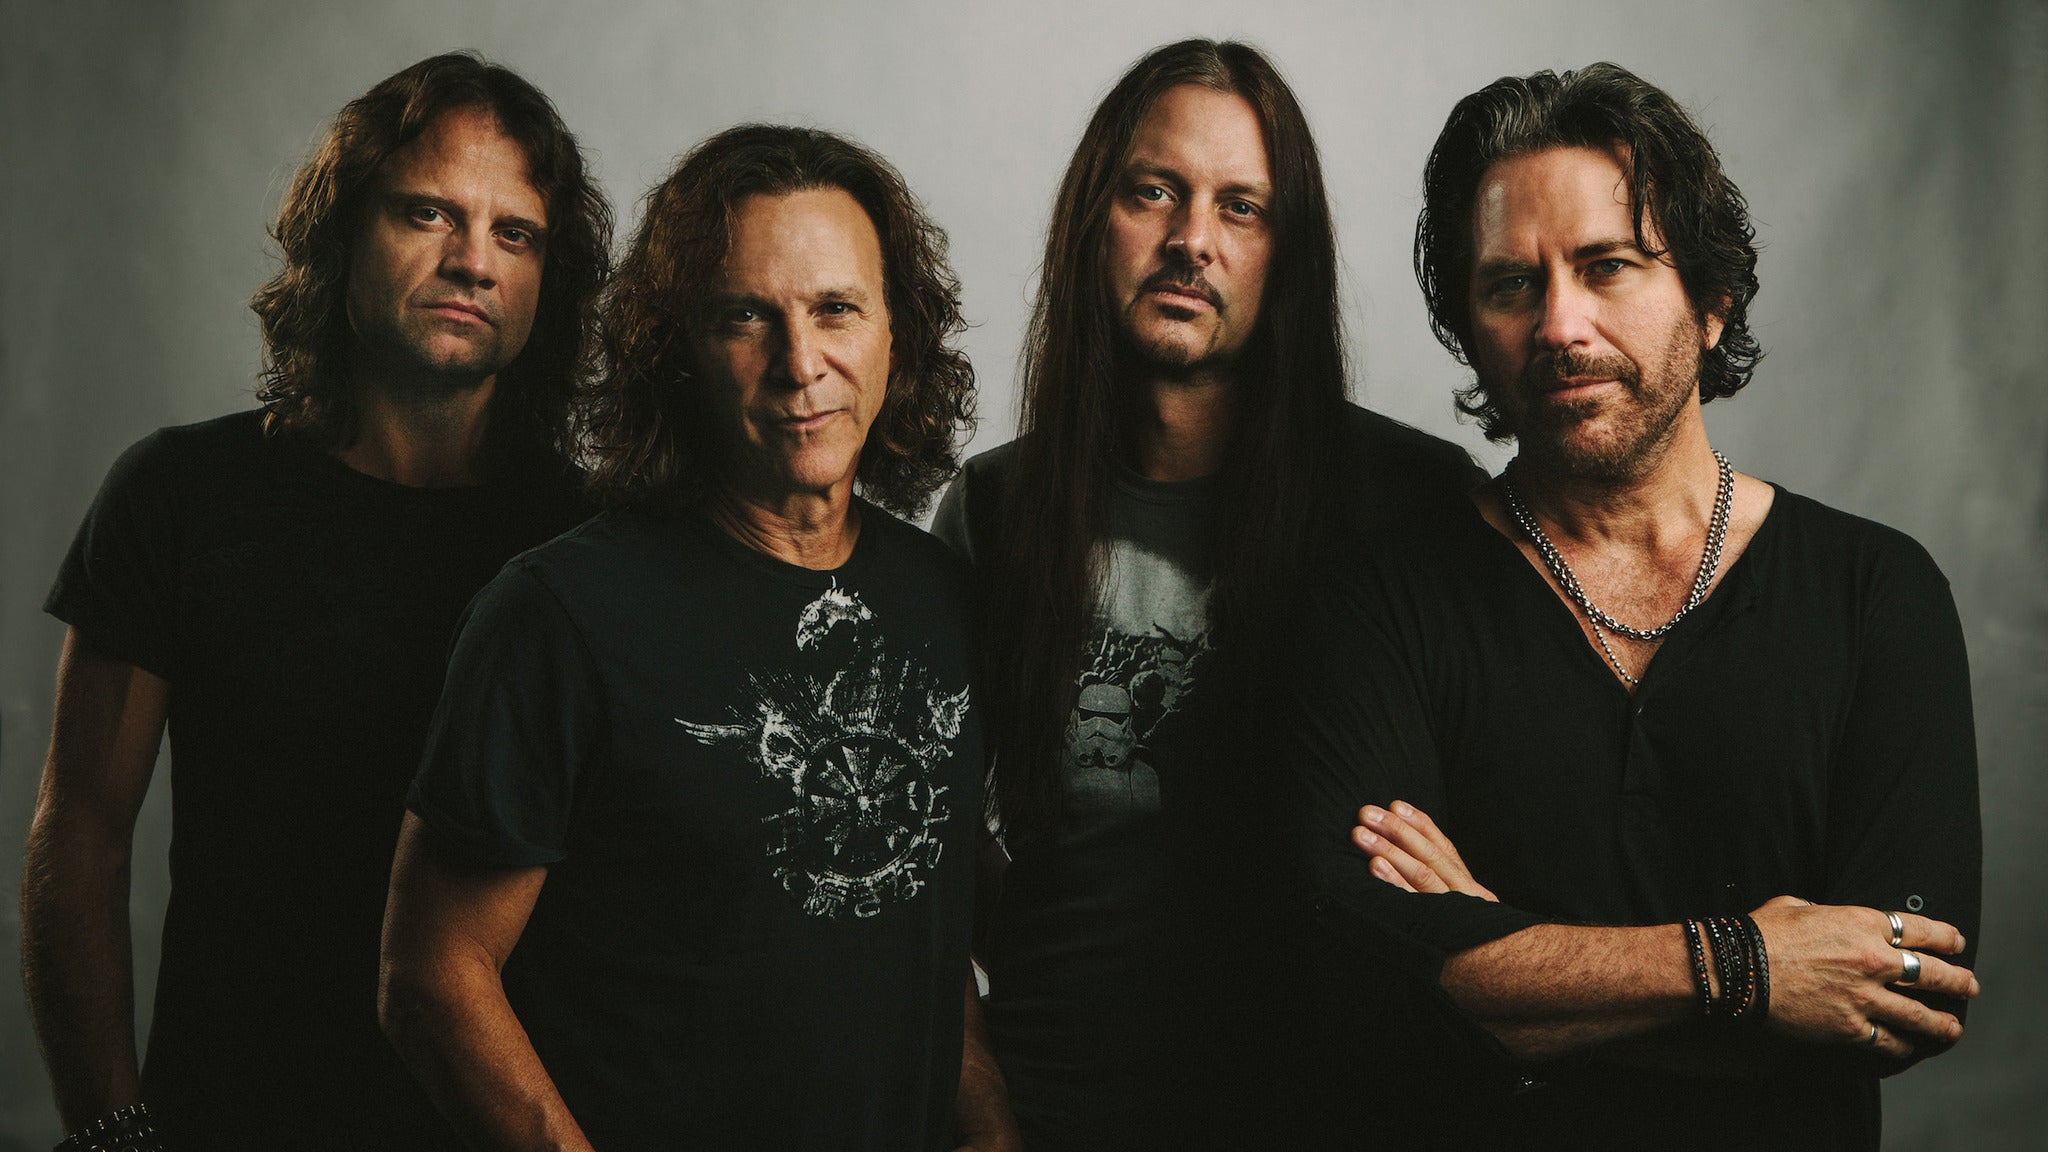 Winger at Islington Assembly Hall Tickets